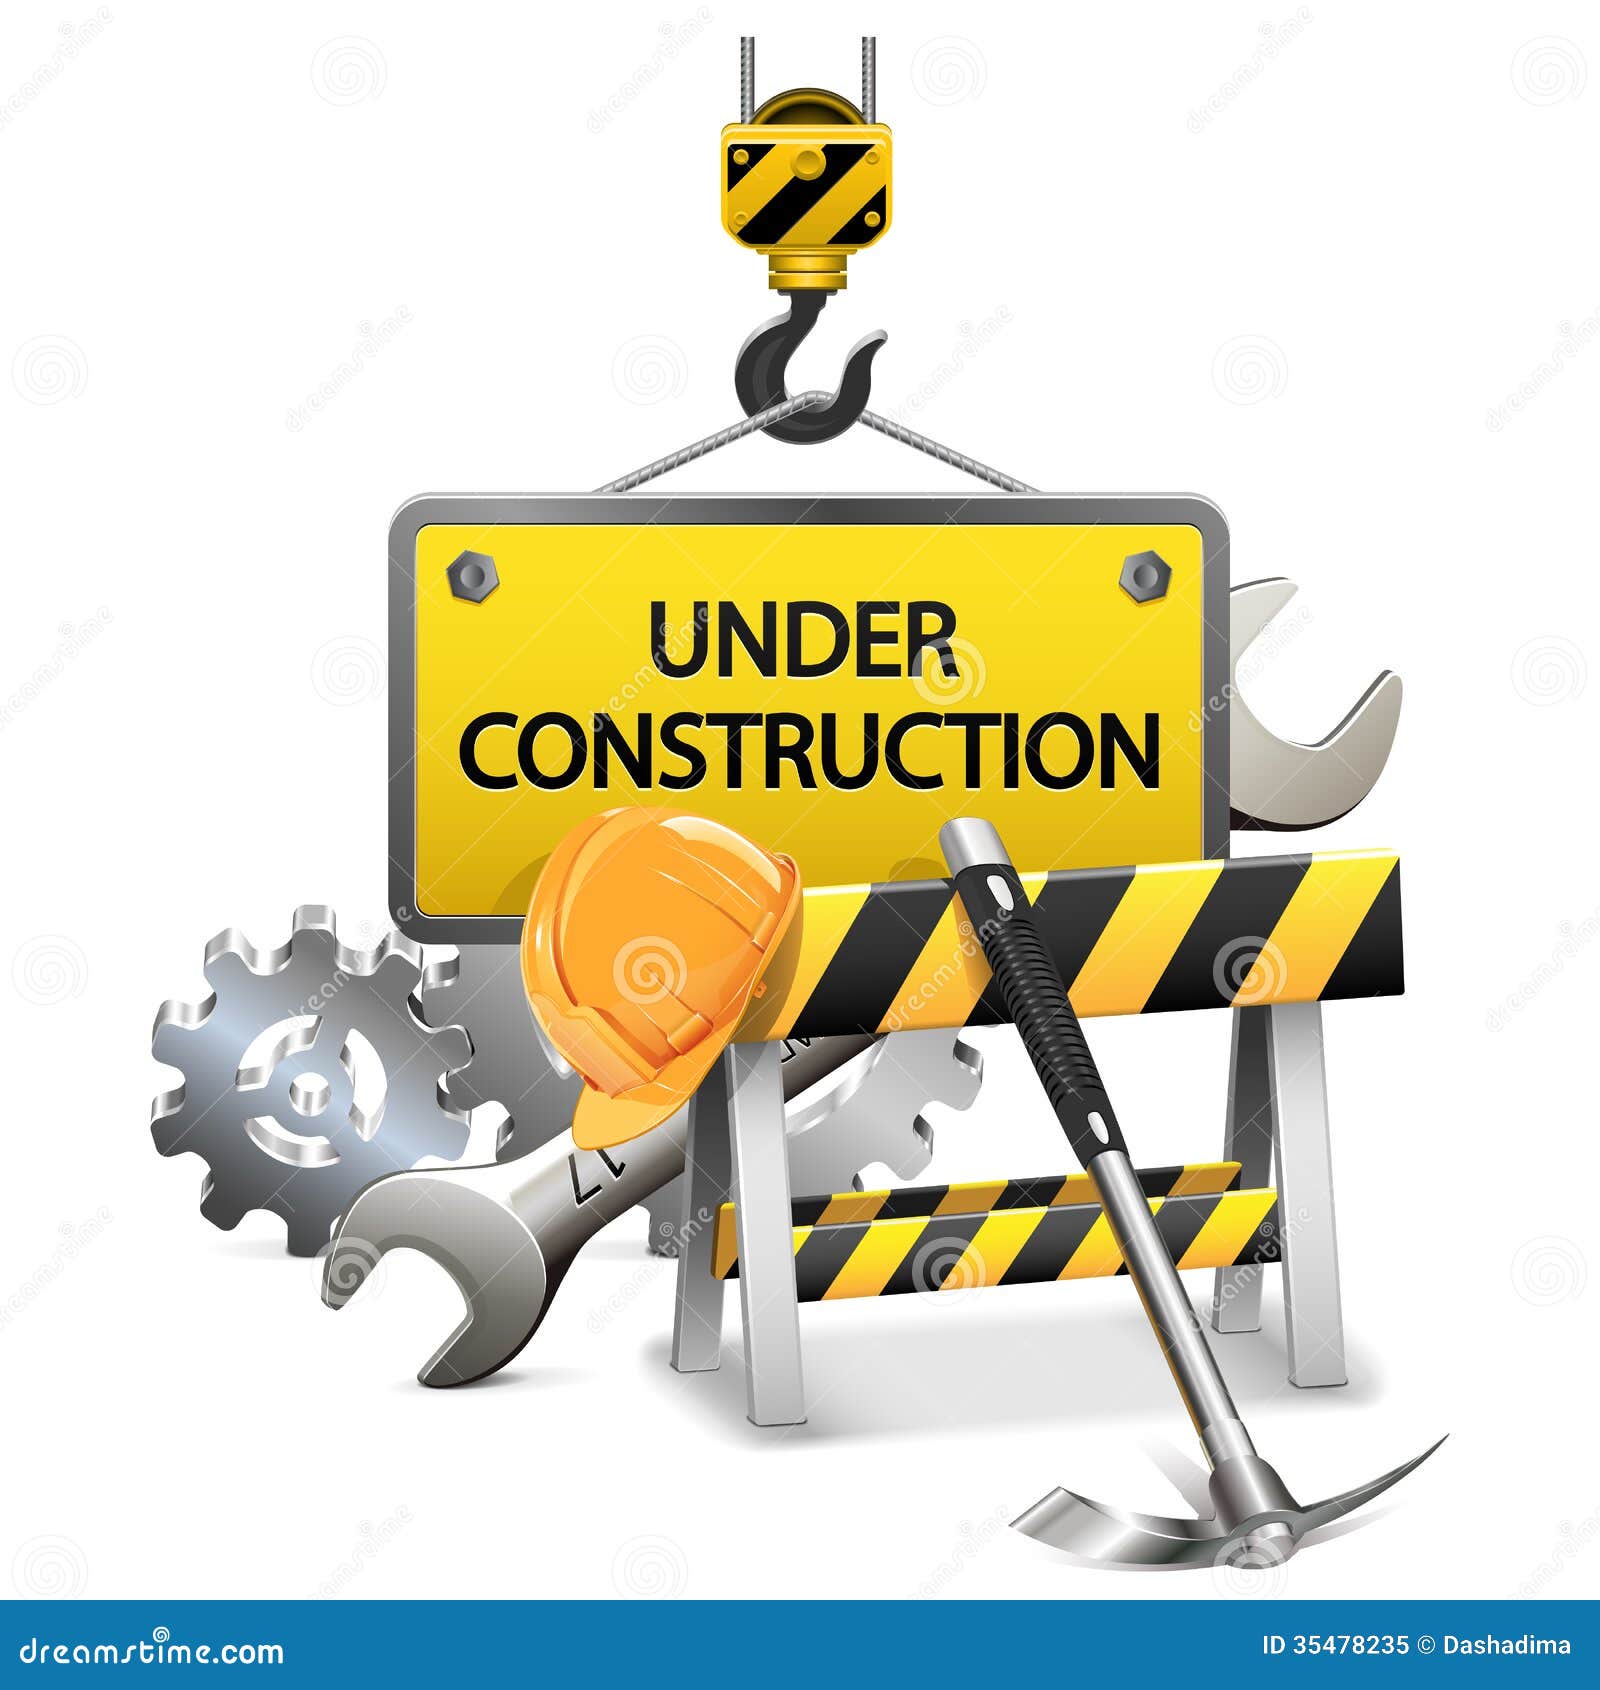 animated under construction clipart - photo #16